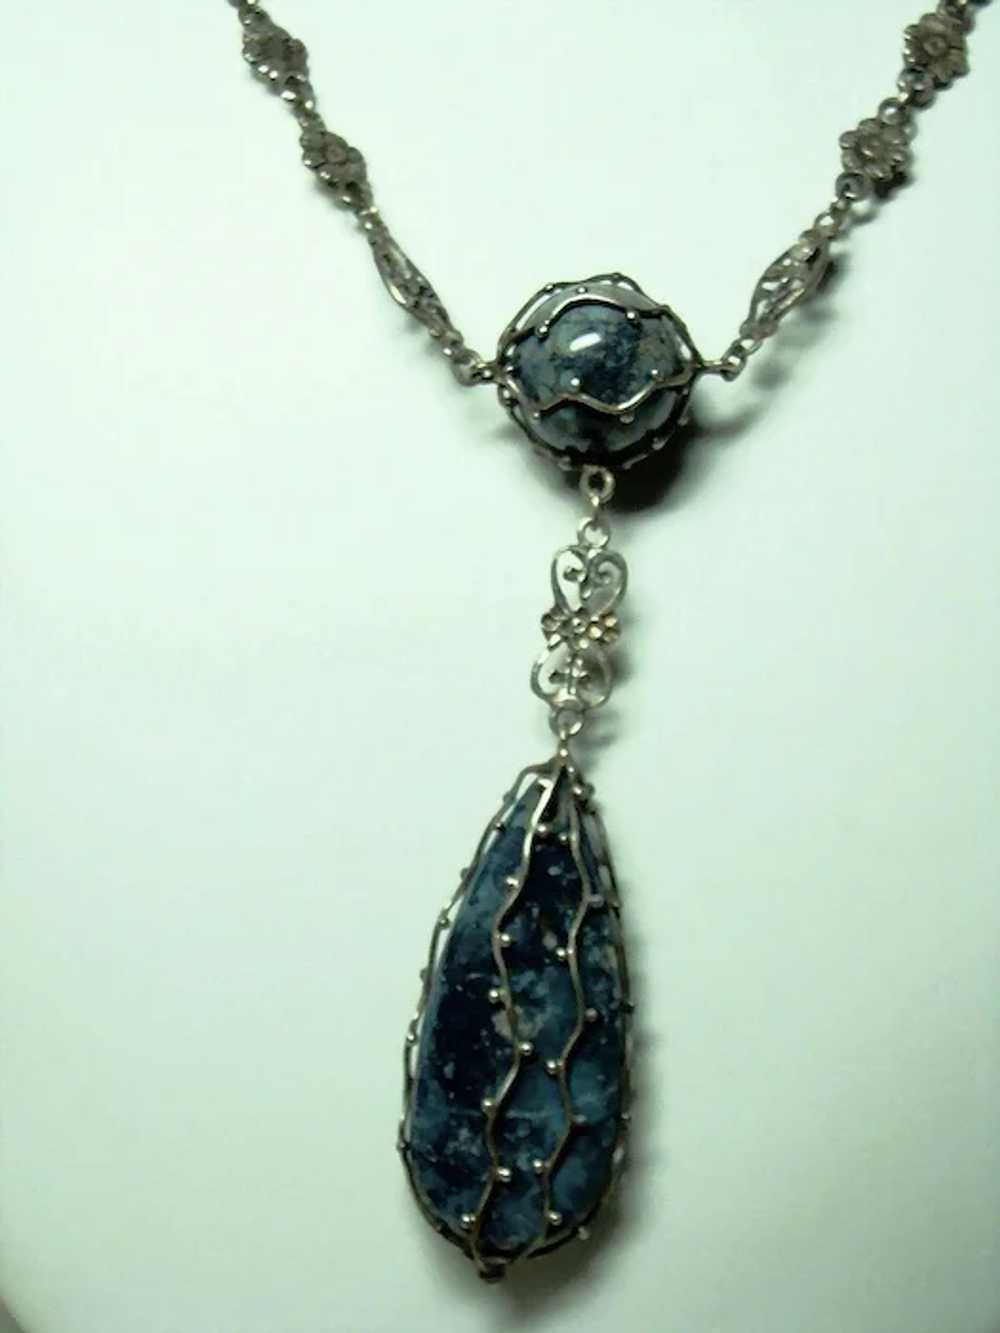 Vintage Arts and Crafts Sodalite Necklace - image 5